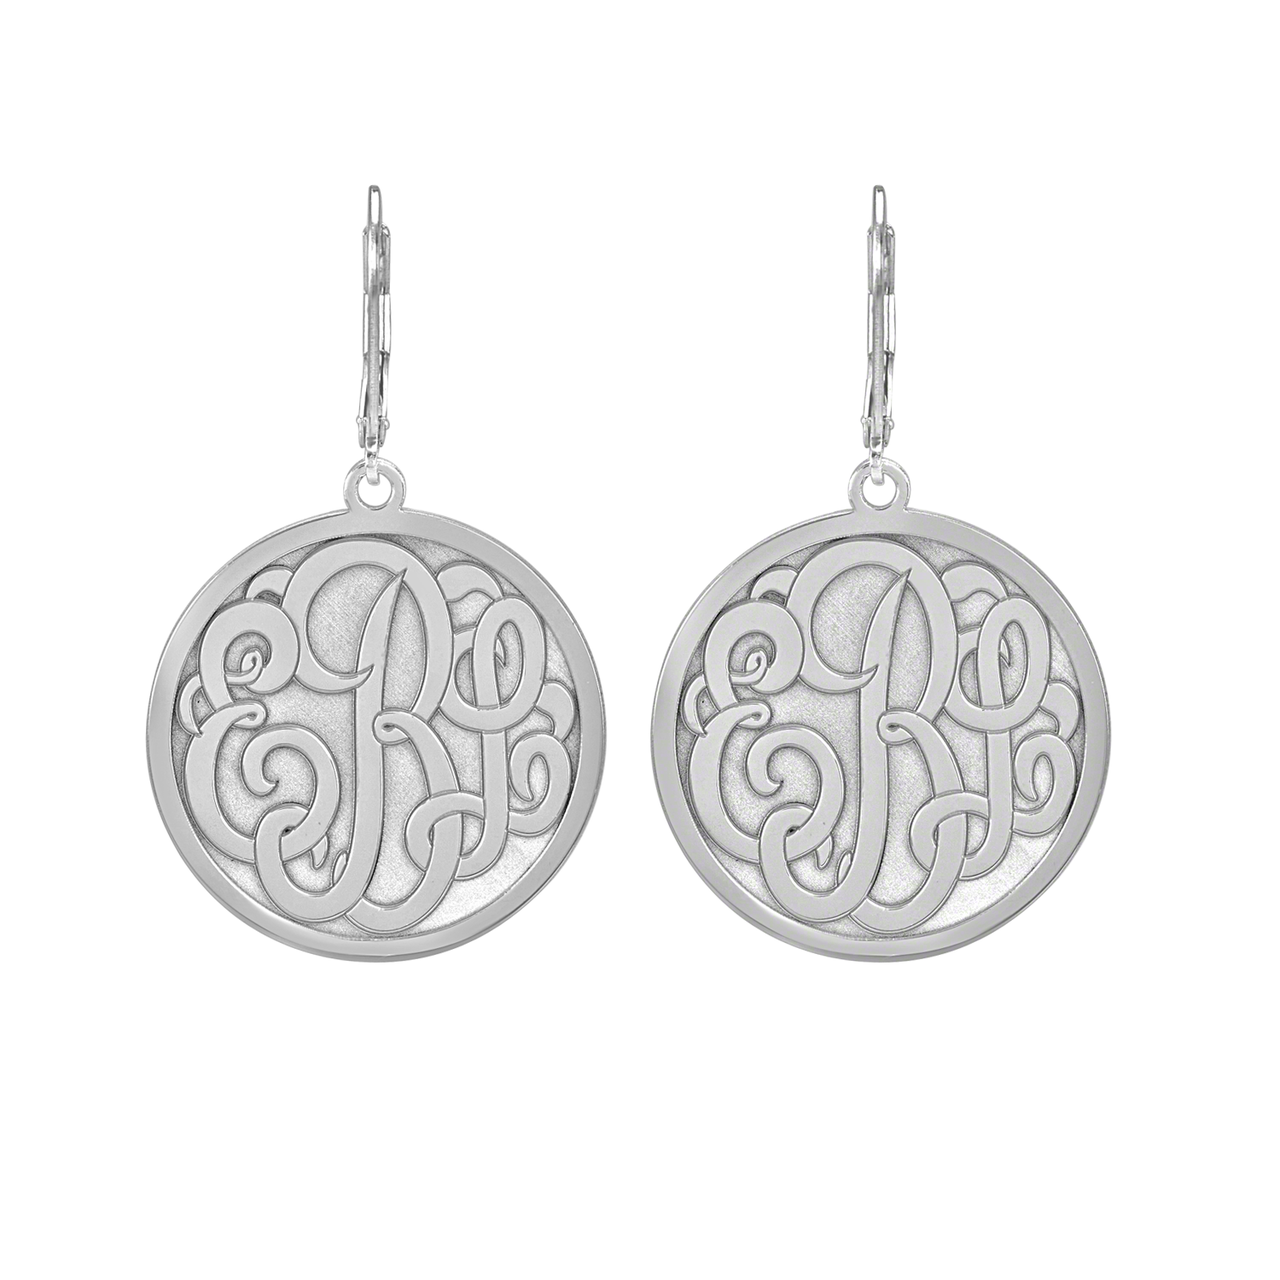 Fink's 25mm Classic Bordered Recessed Monogram Leverback Earrings